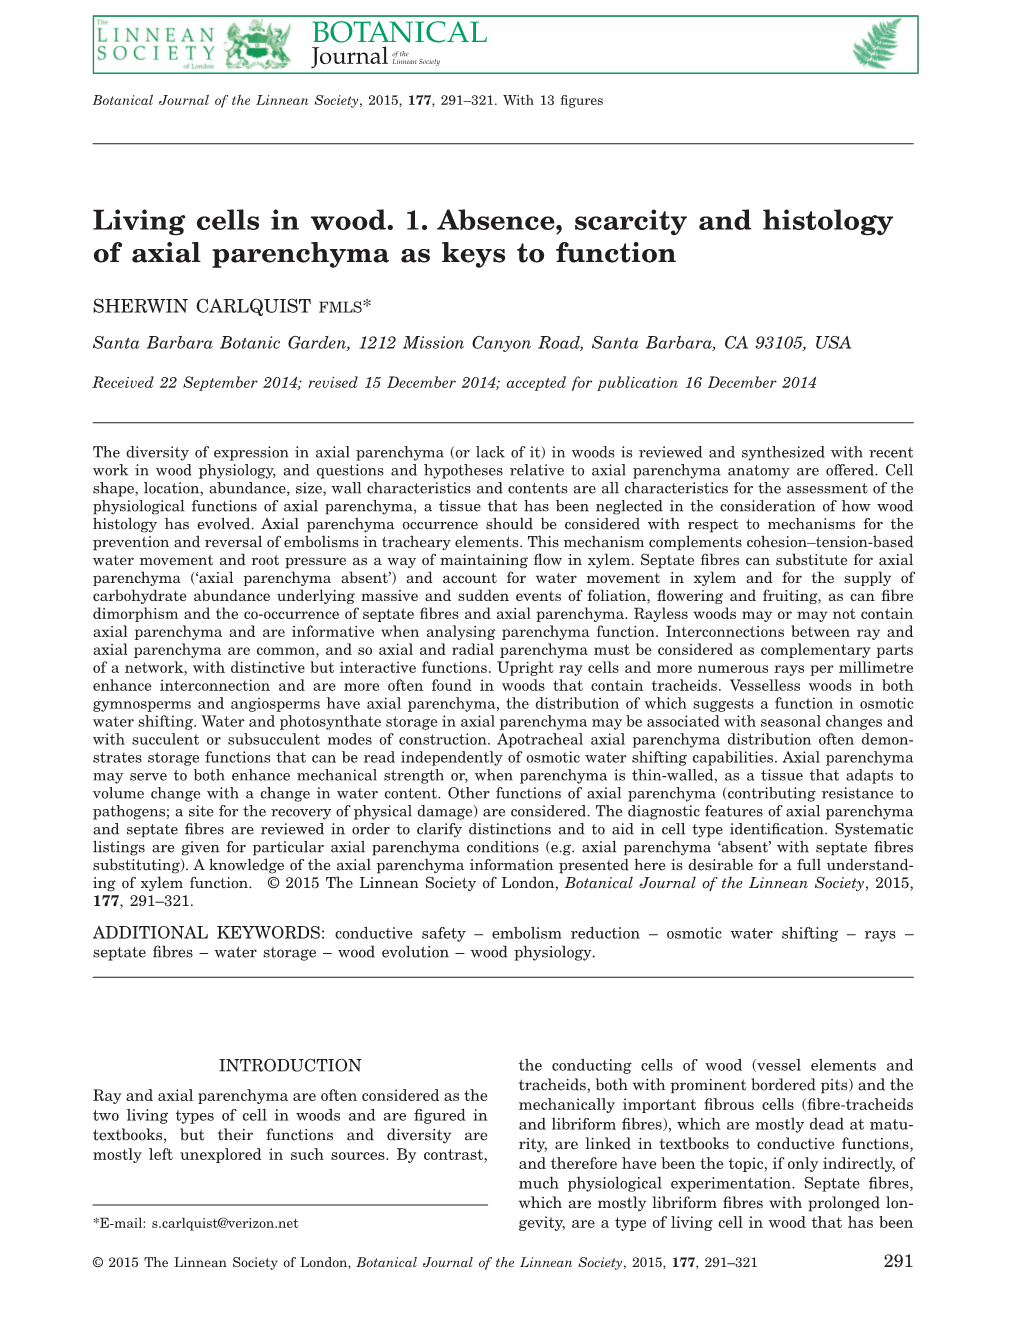 Living Cells in Wood. 1. Absence, Scarcity and Histology of Axial Parenchyma As Keys to Function